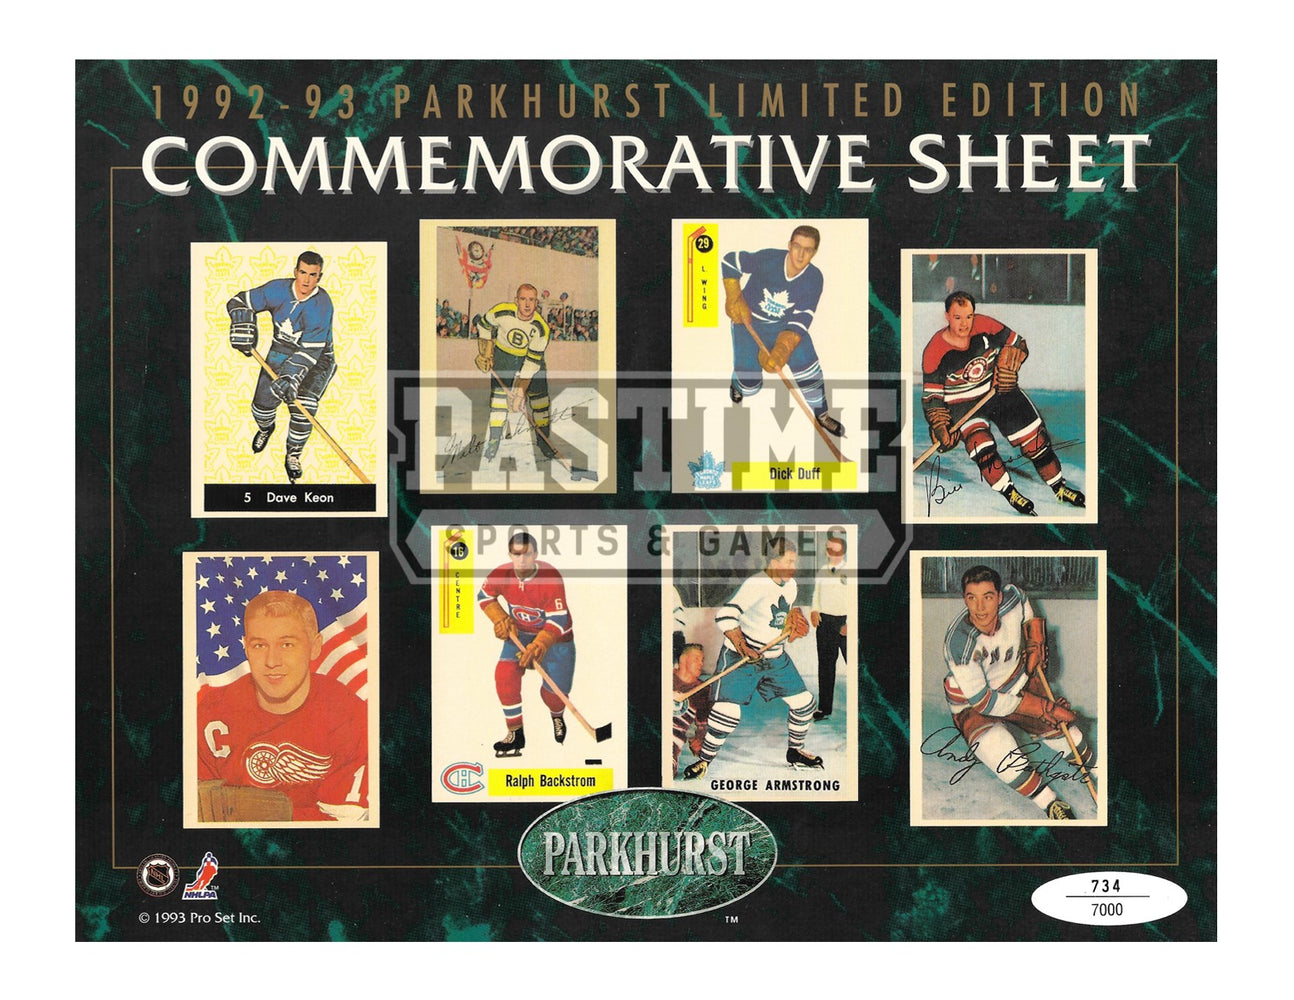 1992-93 Parkhurst Limited Edition Commemorative Sheet 9X12 (# out of 7000) - Pastime Sports & Games